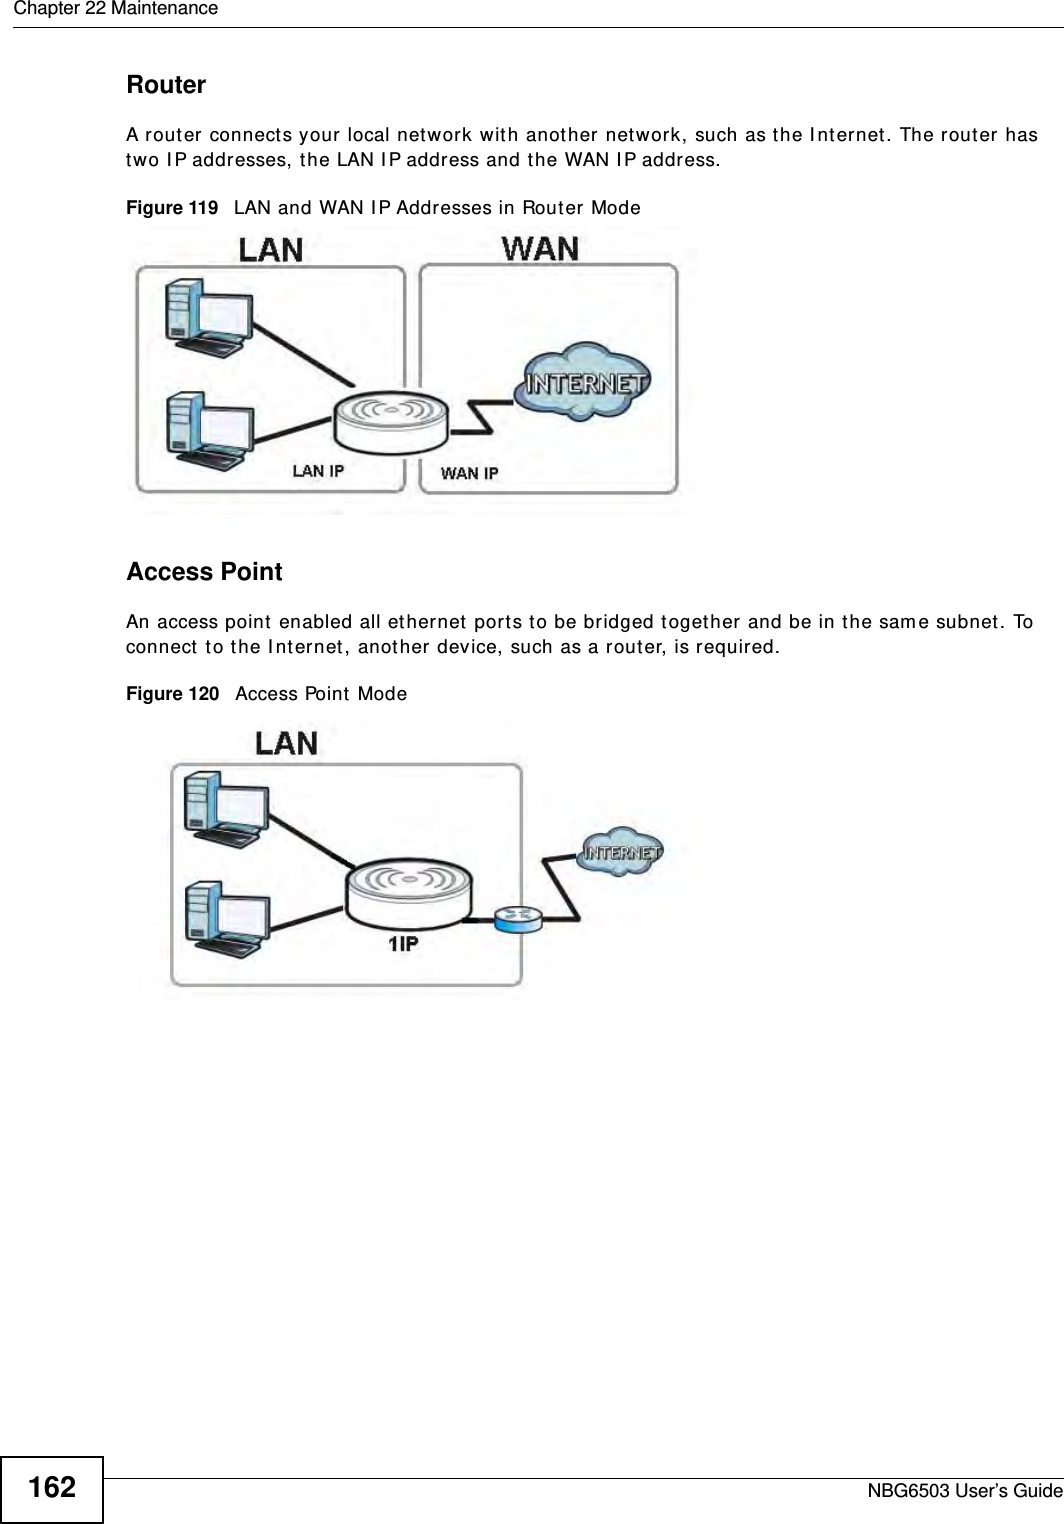 Chapter 22 MaintenanceNBG6503 User’s Guide162RouterA router connects your local network with another network, such as the Internet. The router has two IP addresses, the LAN IP address and the WAN IP address.Figure 119   LAN and WAN IP Addresses in Router ModeAccess PointAn access point enabled all ethernet ports to be bridged together and be in the same subnet. To connect to the Internet, another device, such as a router, is required.Figure 120   Access Point Mode